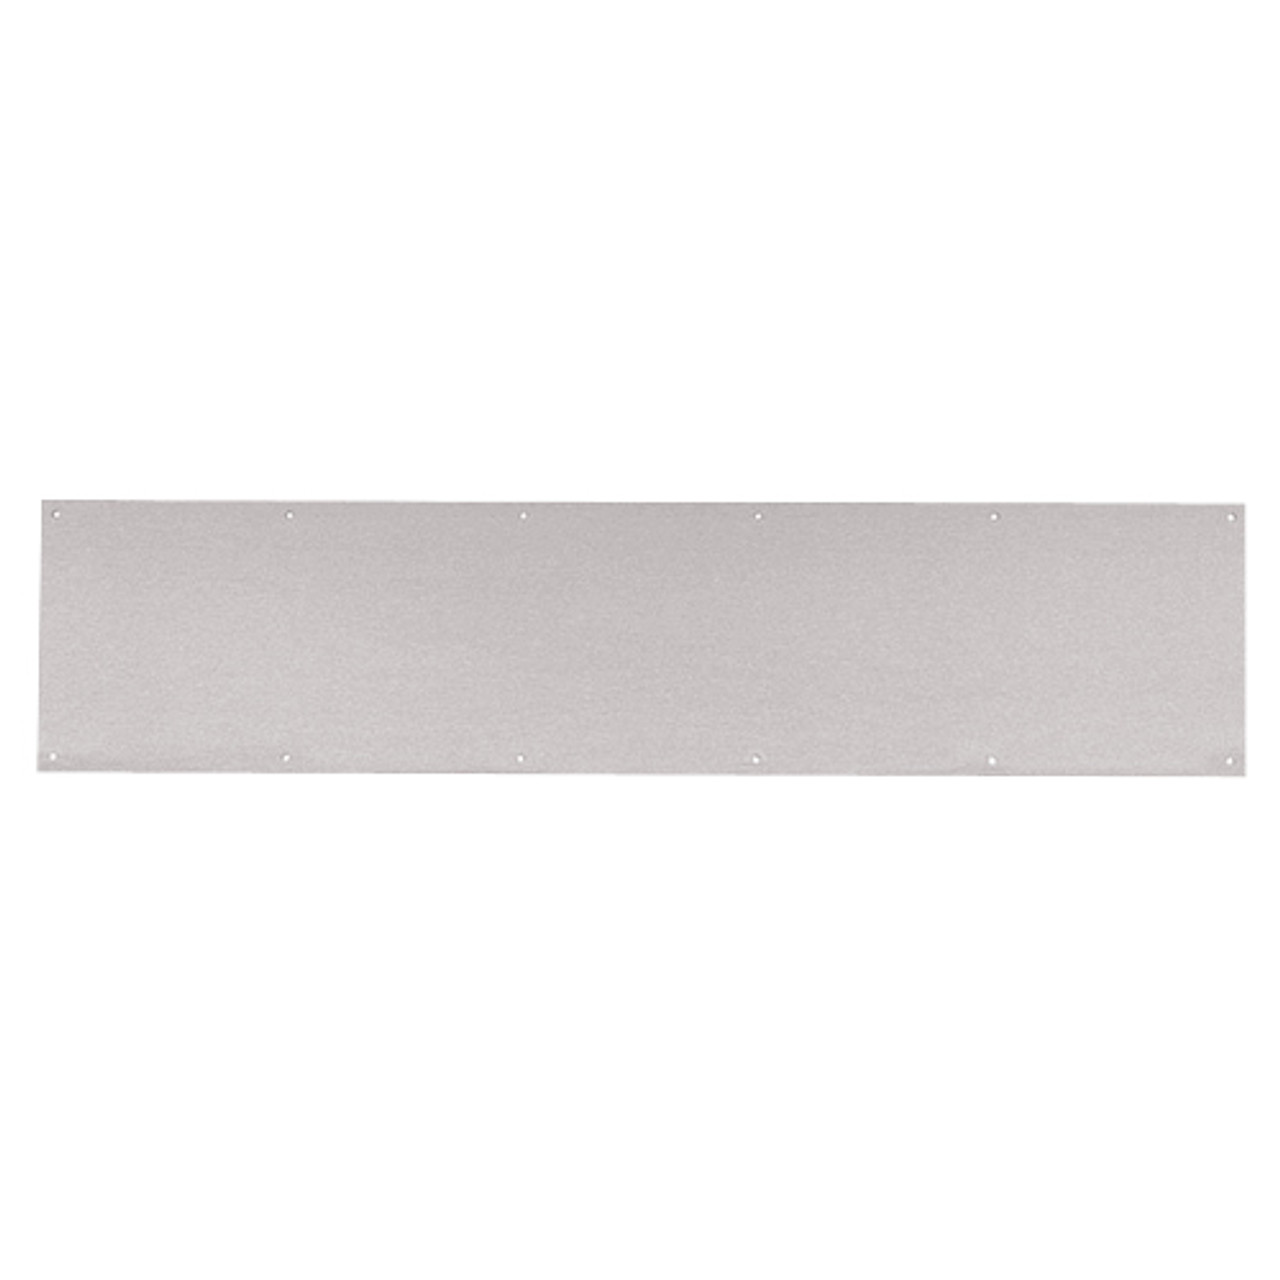 8400-US32D-7.5x36-B-CS Ives 8400 Series Protection Plate in Satin Stainless Steel